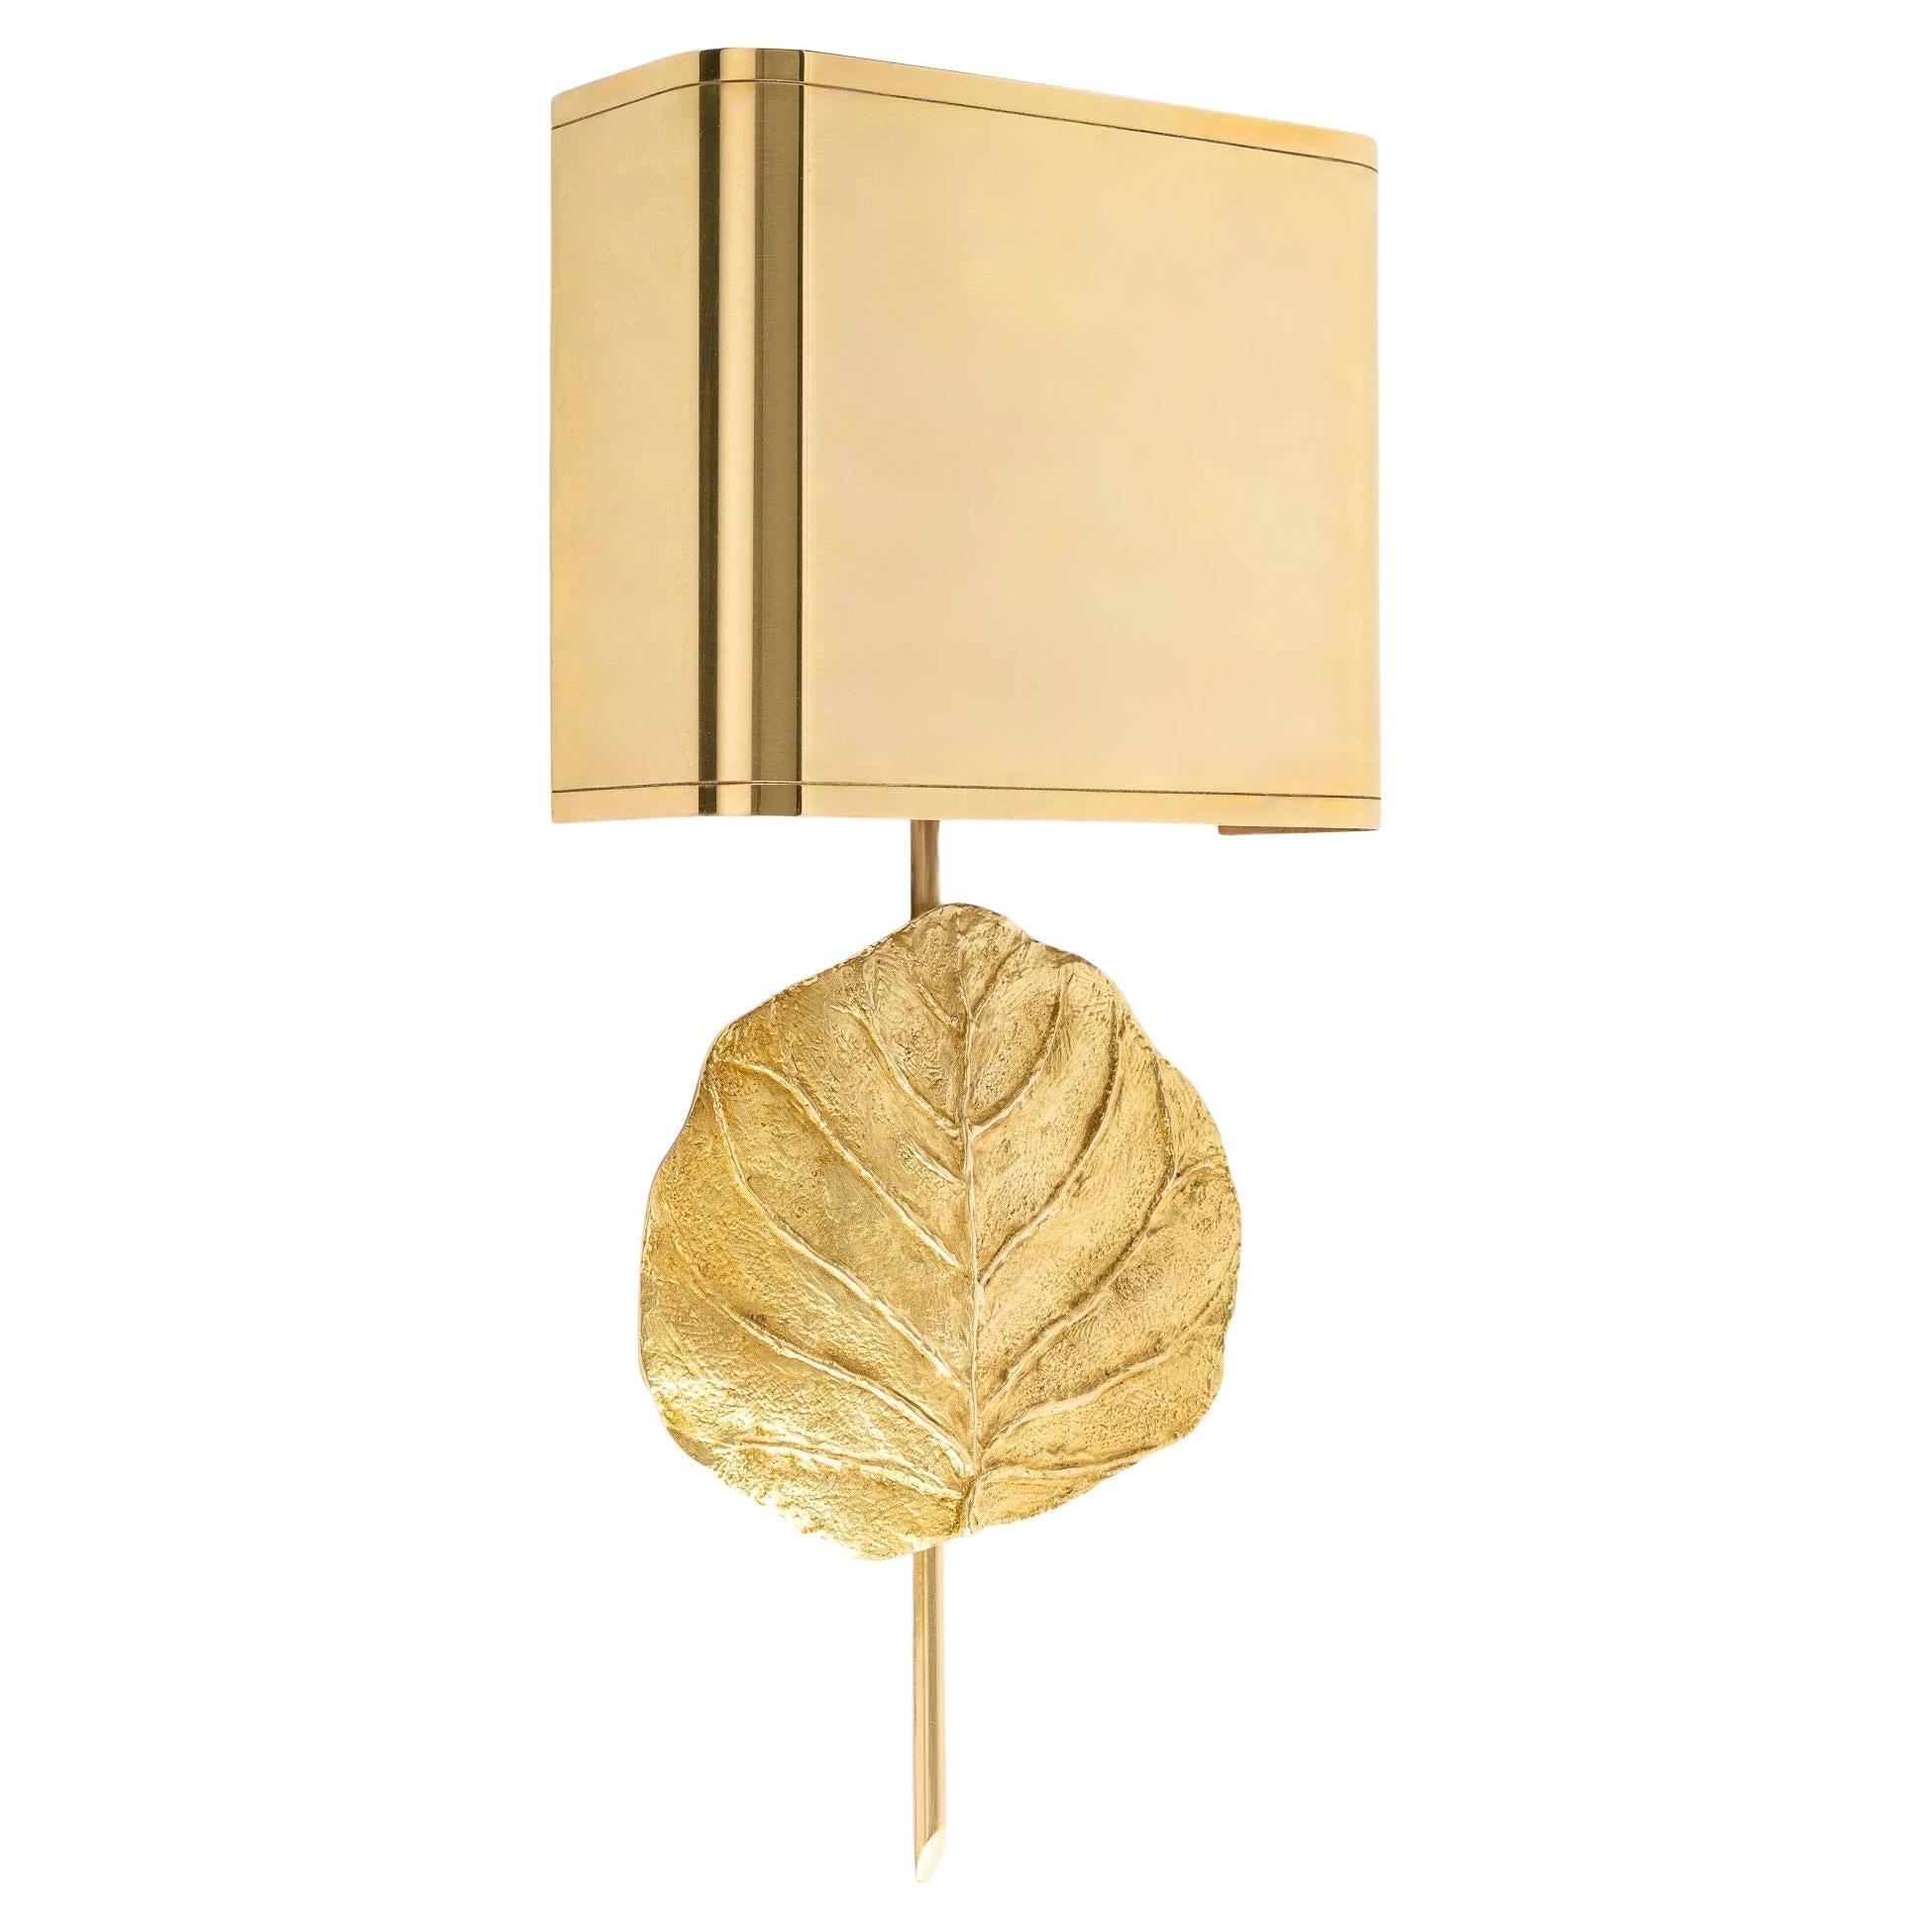 Pair of sconces model Clea by Chrystiane Charles for Maison Charles. Luxurious version of the model, lampshade with border and high quality mounting. Gilded bronze, signed C. Charles on the back of the leaves.

Composed of a long round stem in